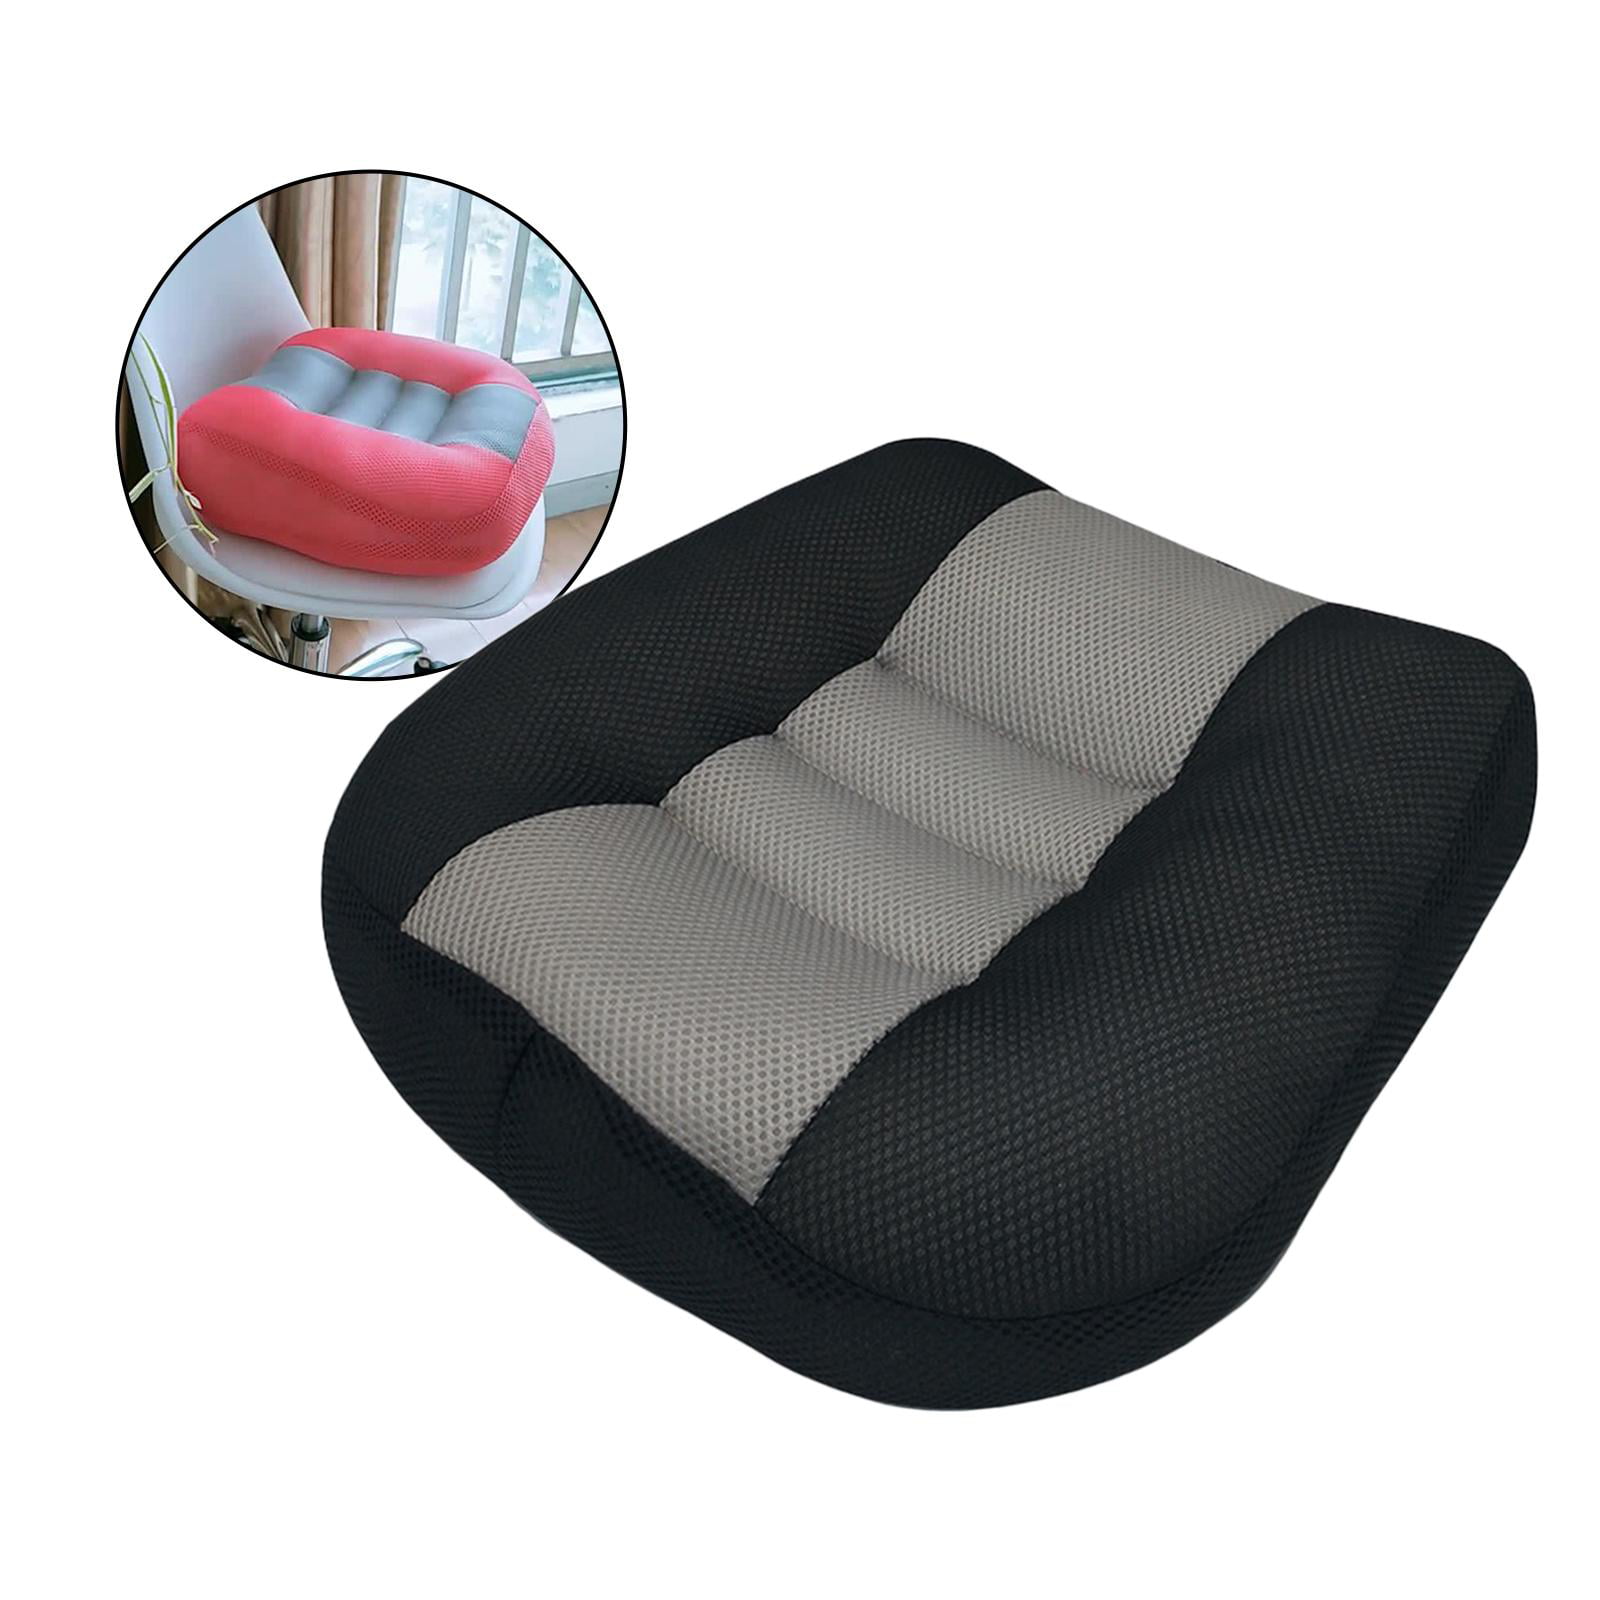 Adult Car booster Cushion, for Short Drivers People Office Chair Portable  Comfortable Thickened Breathable Driving Auto Seat Pad ,Blue Style A 